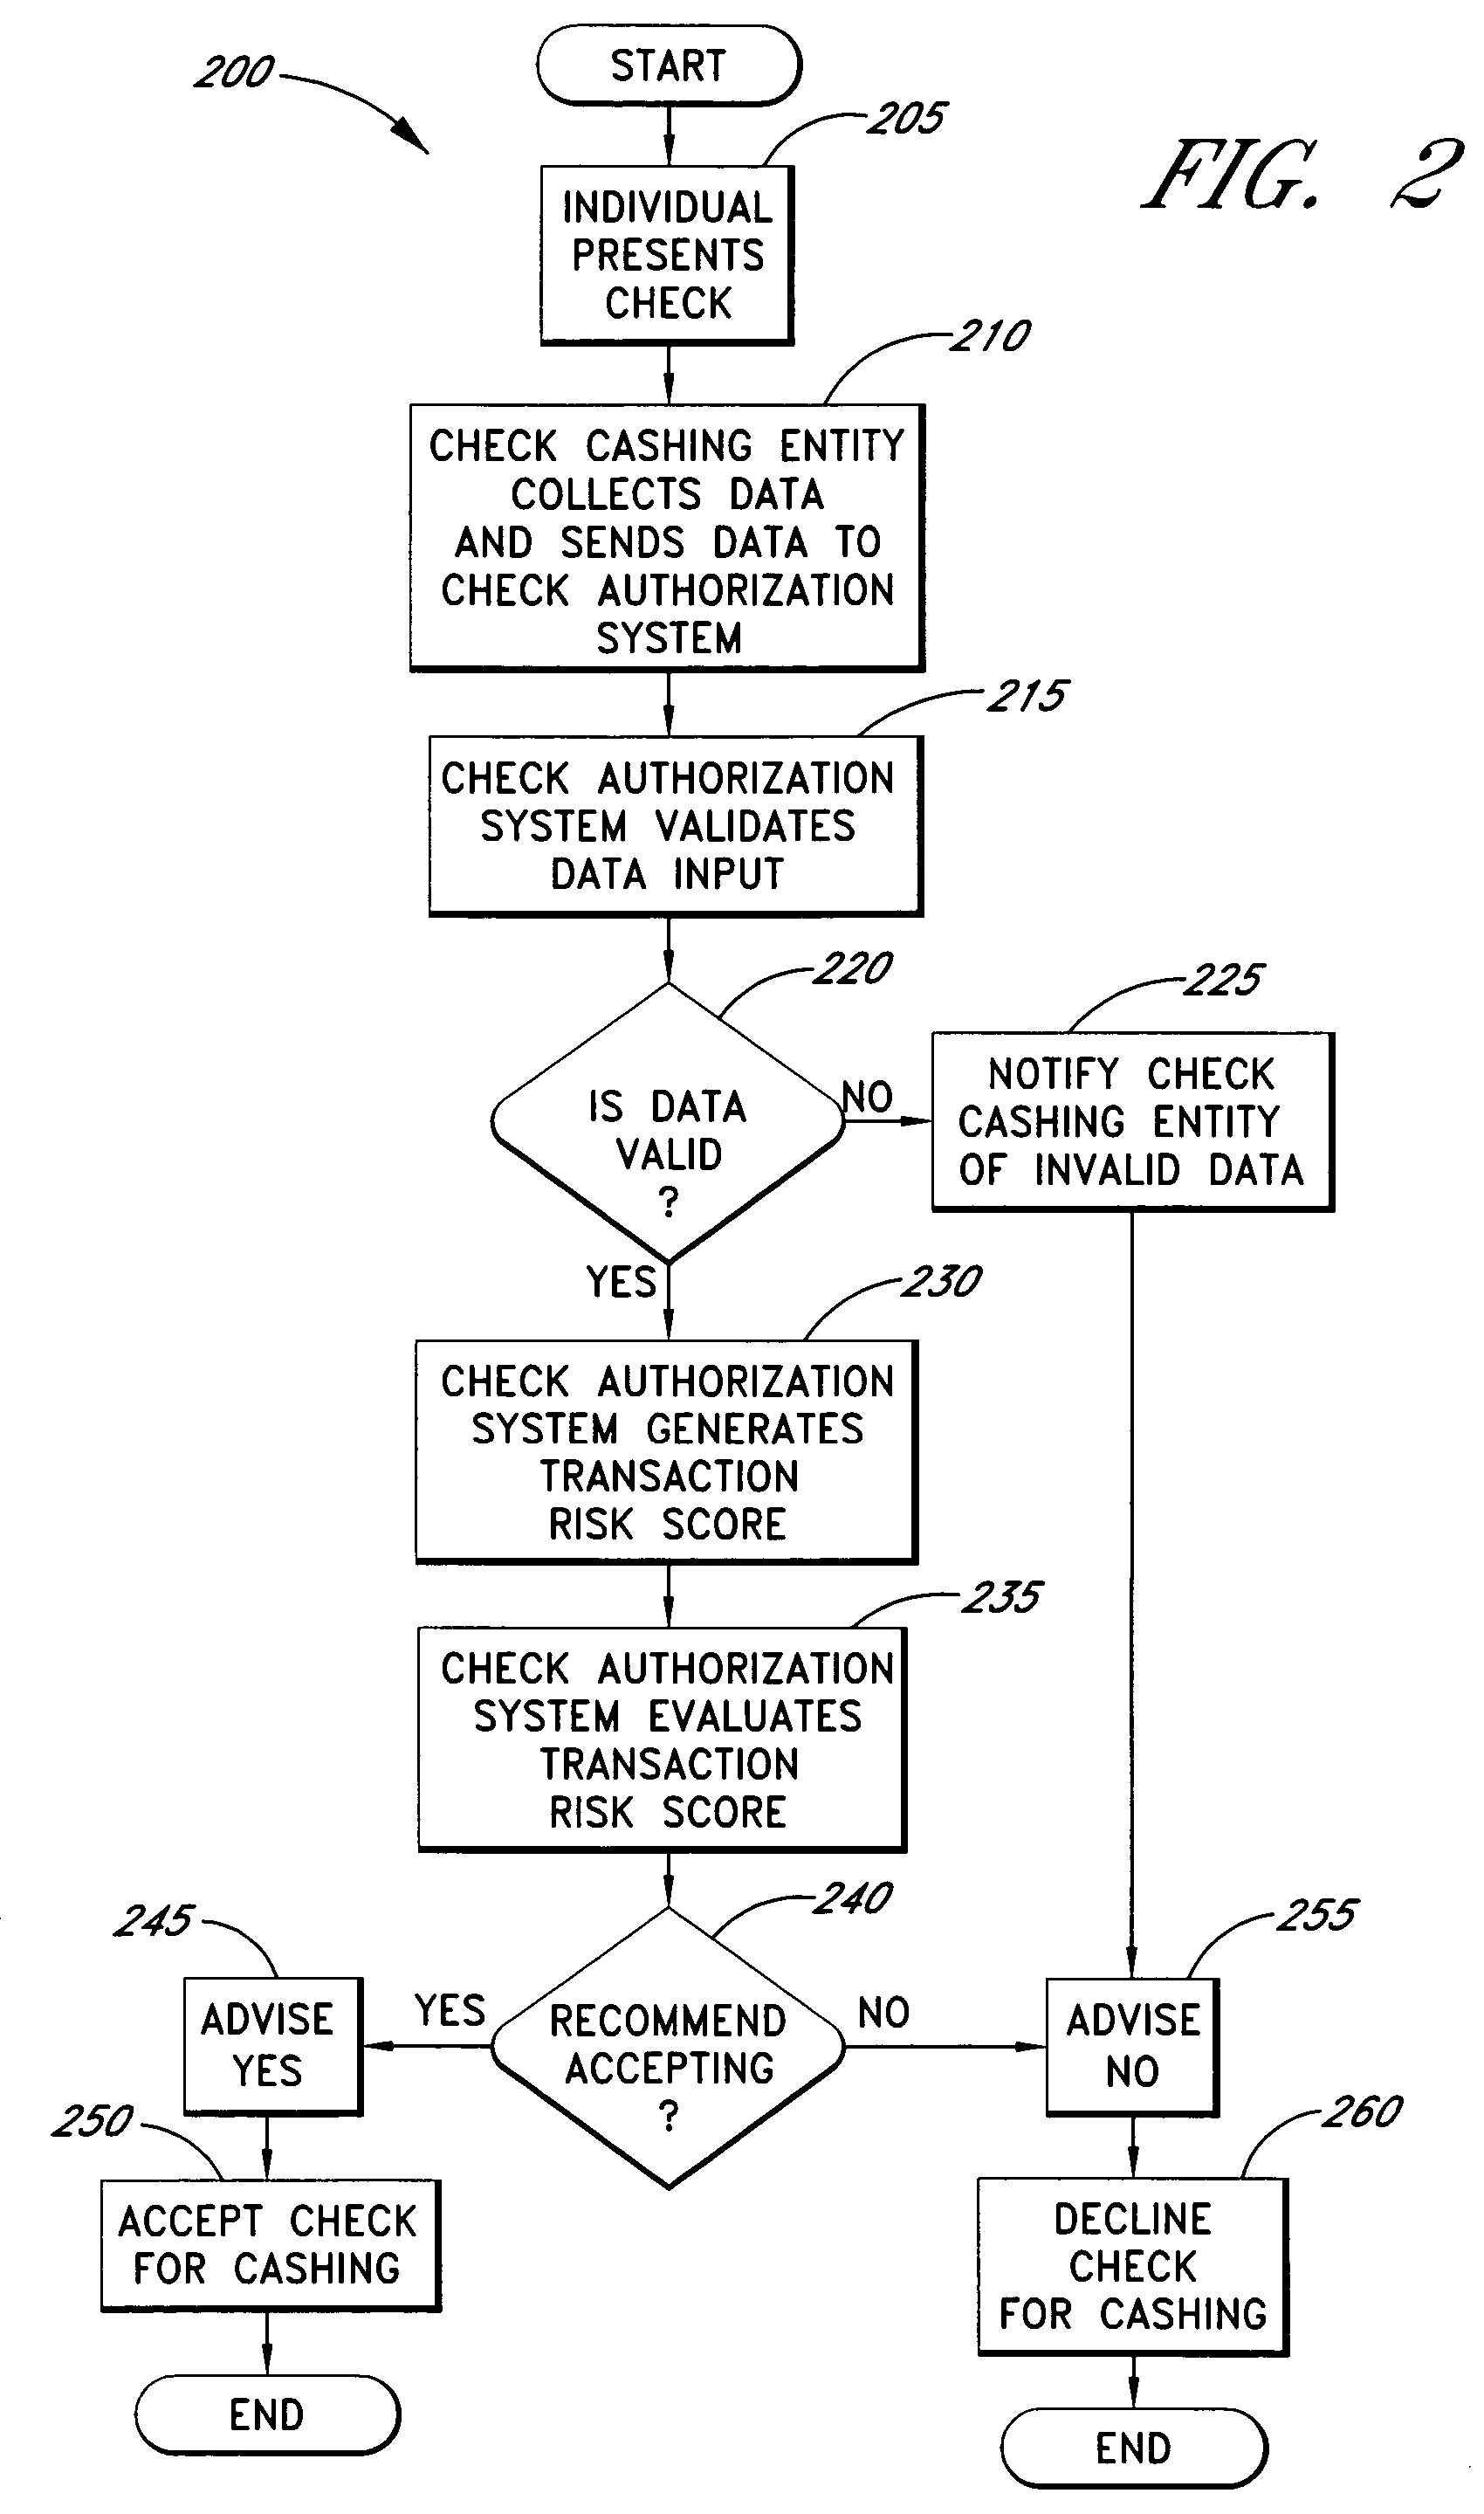 Systems and methods for identifying payor location based on transaction data